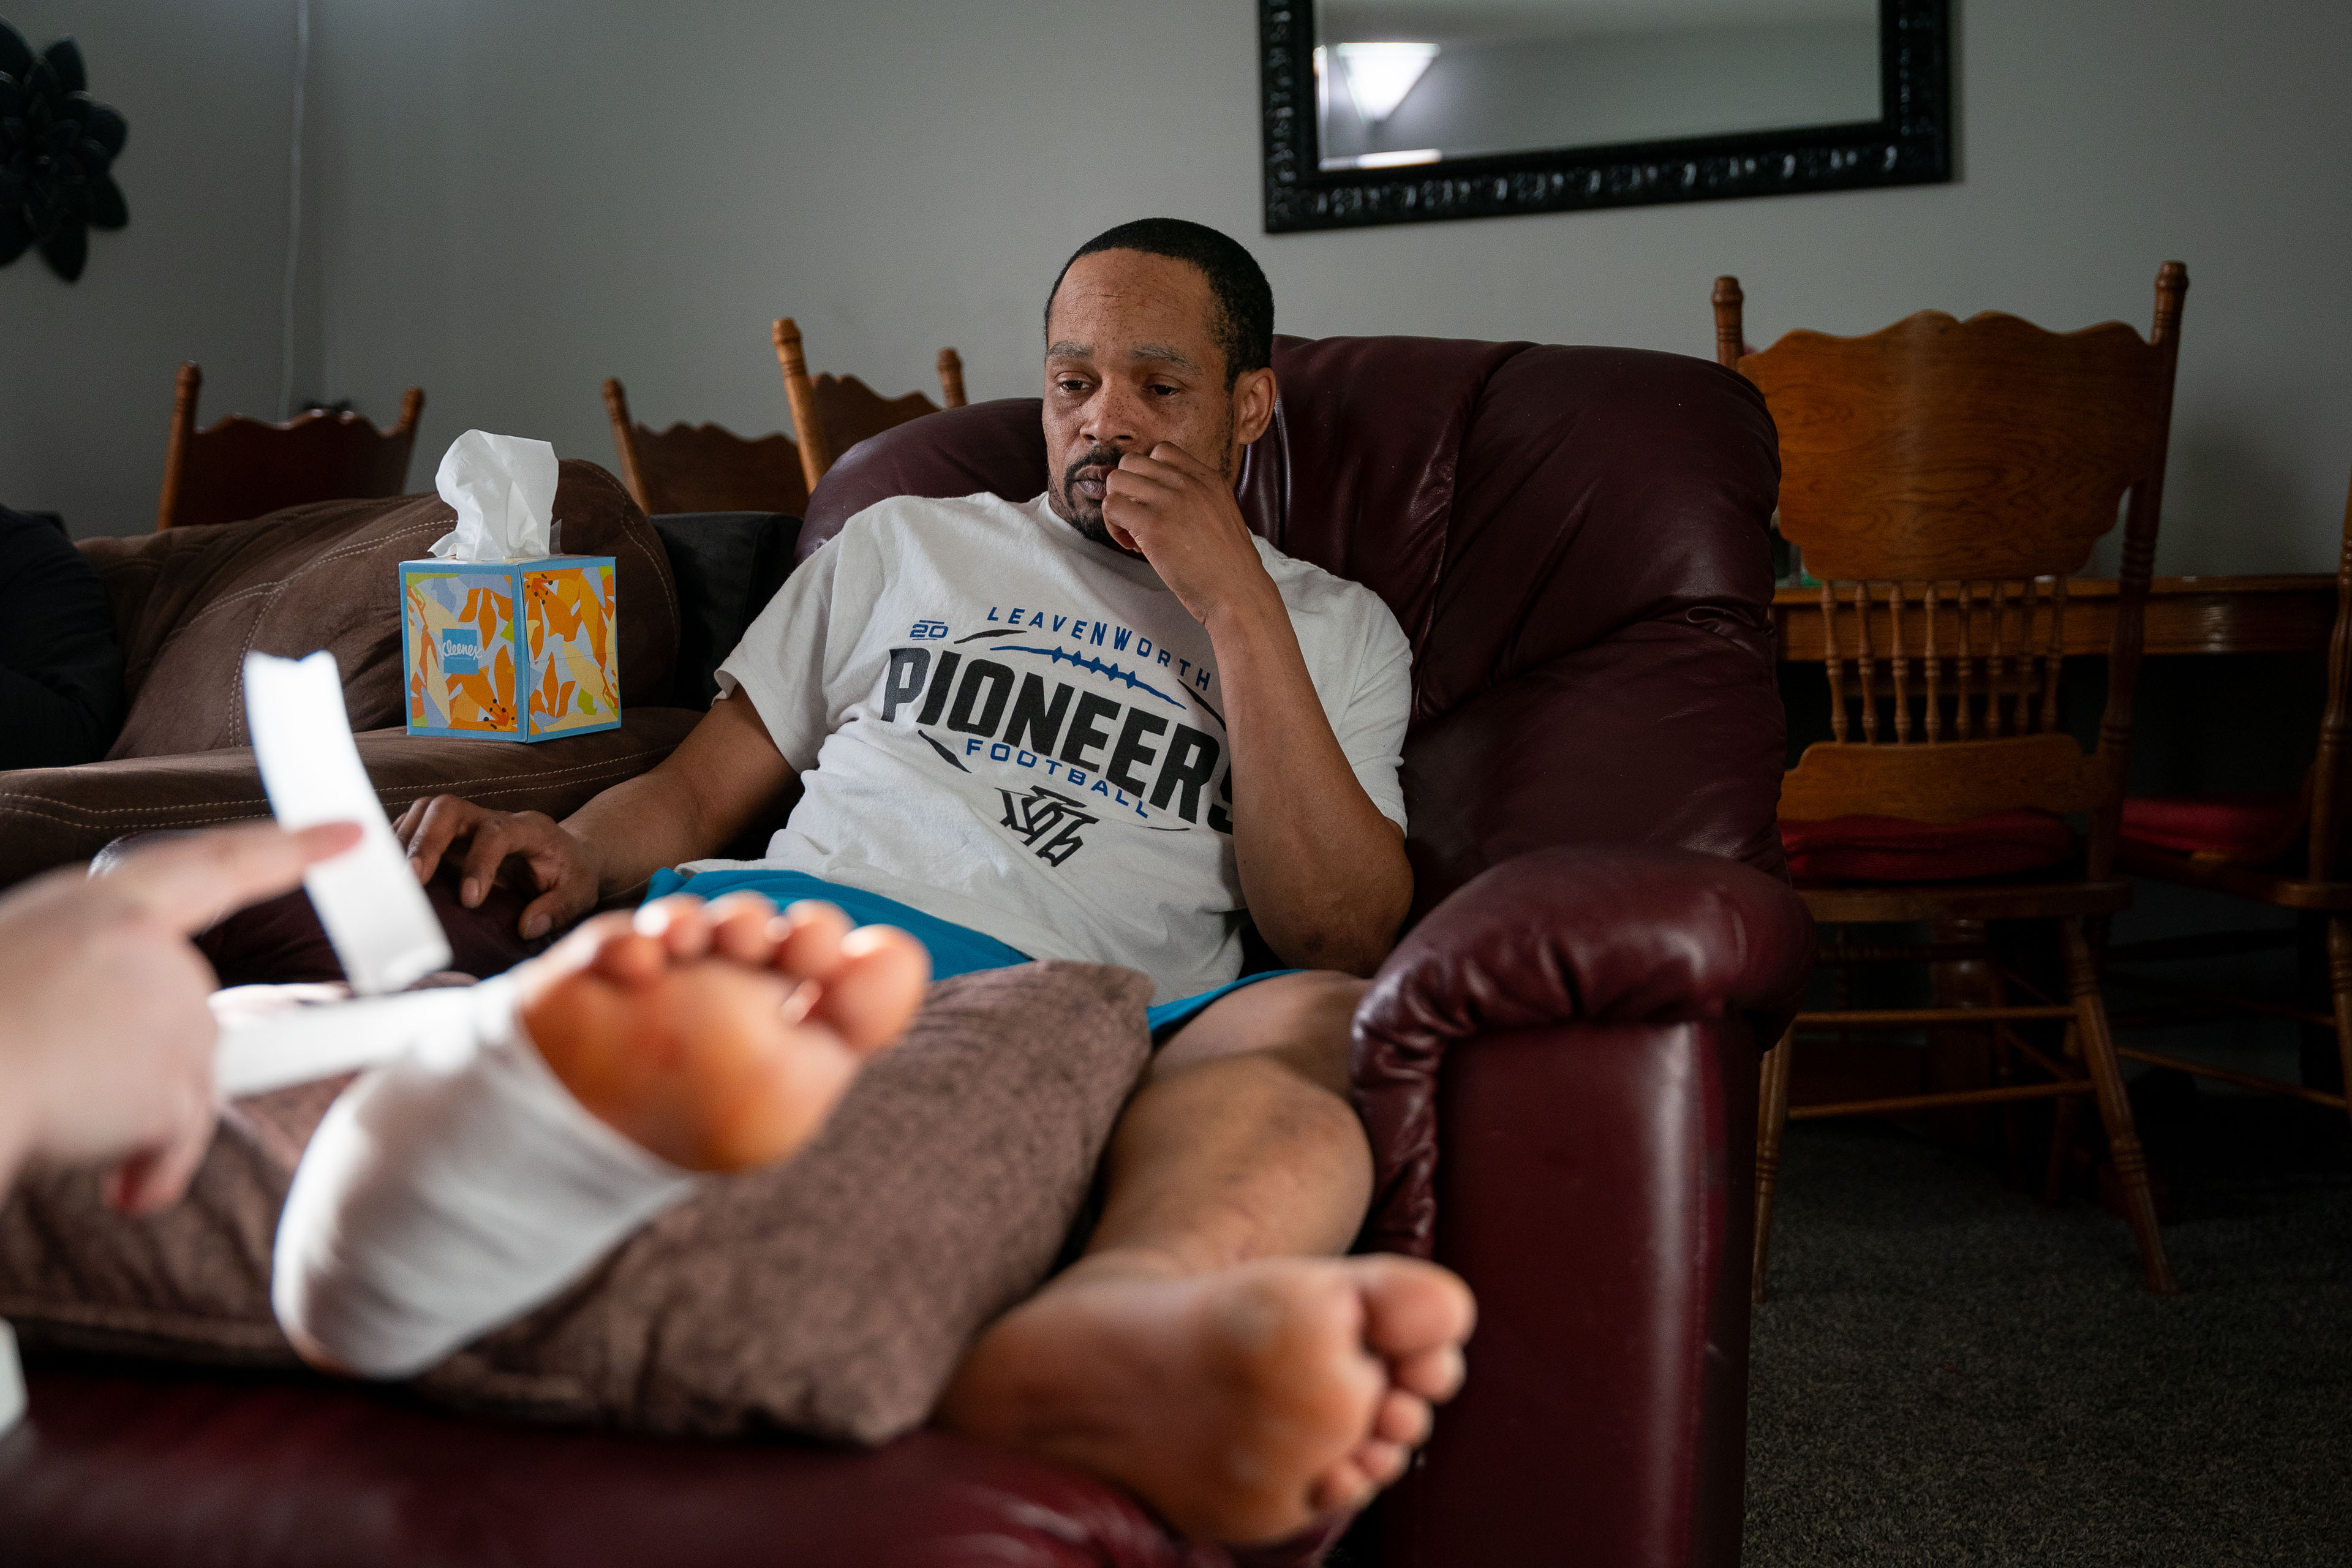 Jacob Gooch Sr. sits in a recliner in his home. His legs are elevated, with his injured foot raised slightly higher on a pillow. Emily Tavis, offscreen, wraps his foot in a white bandage.